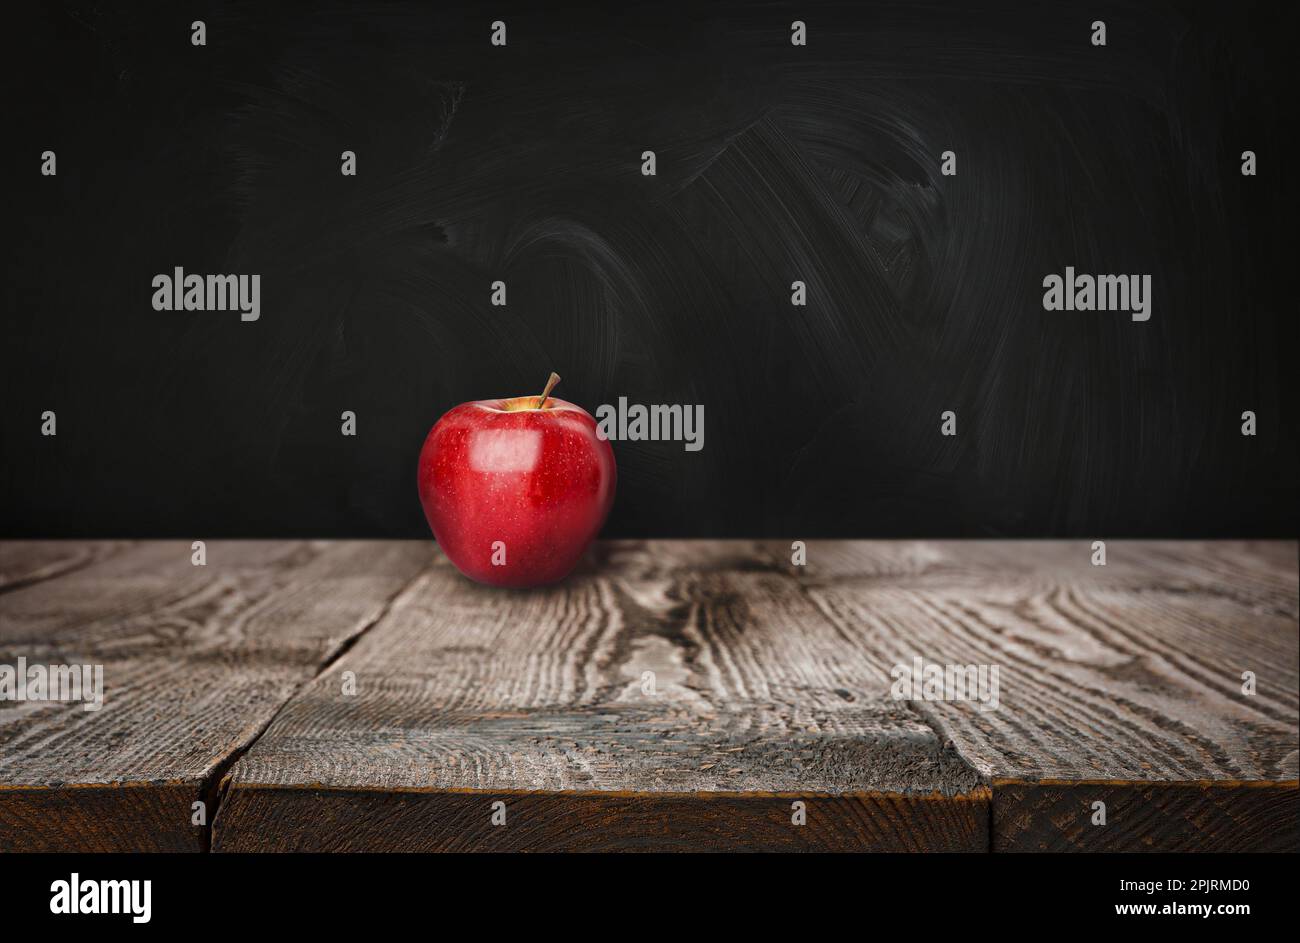 Fresh ripe red apple on wooden table near black chalkboard, space for text Stock Photo